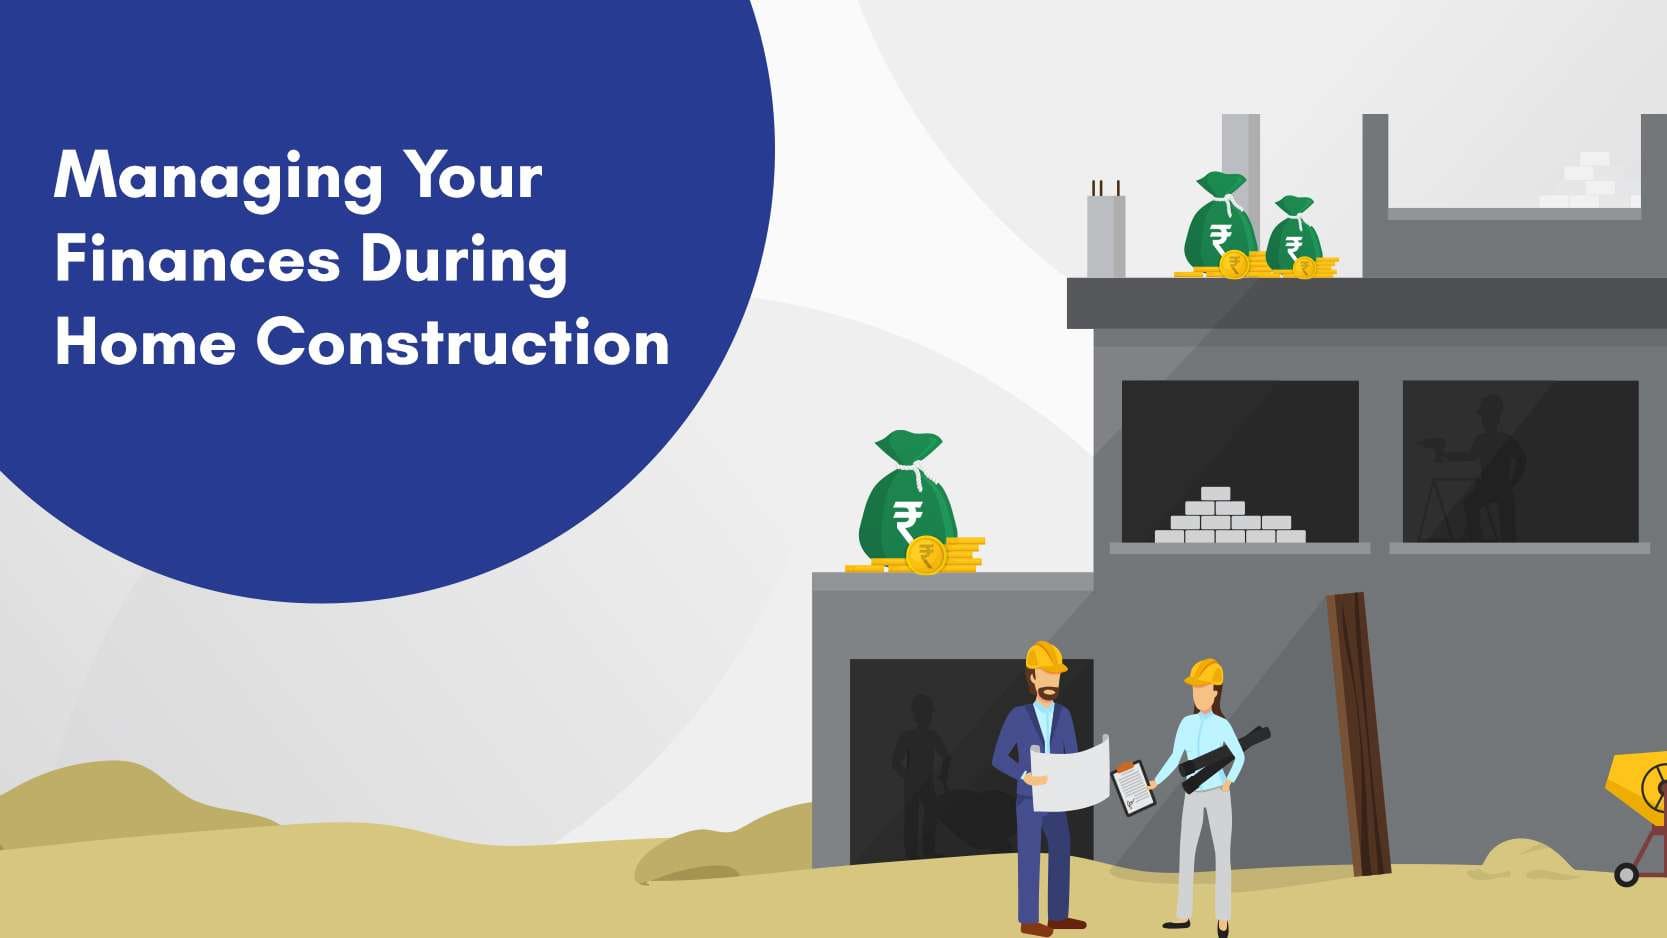 Managing Your Finances During Home Construction: Budgeting Tips
